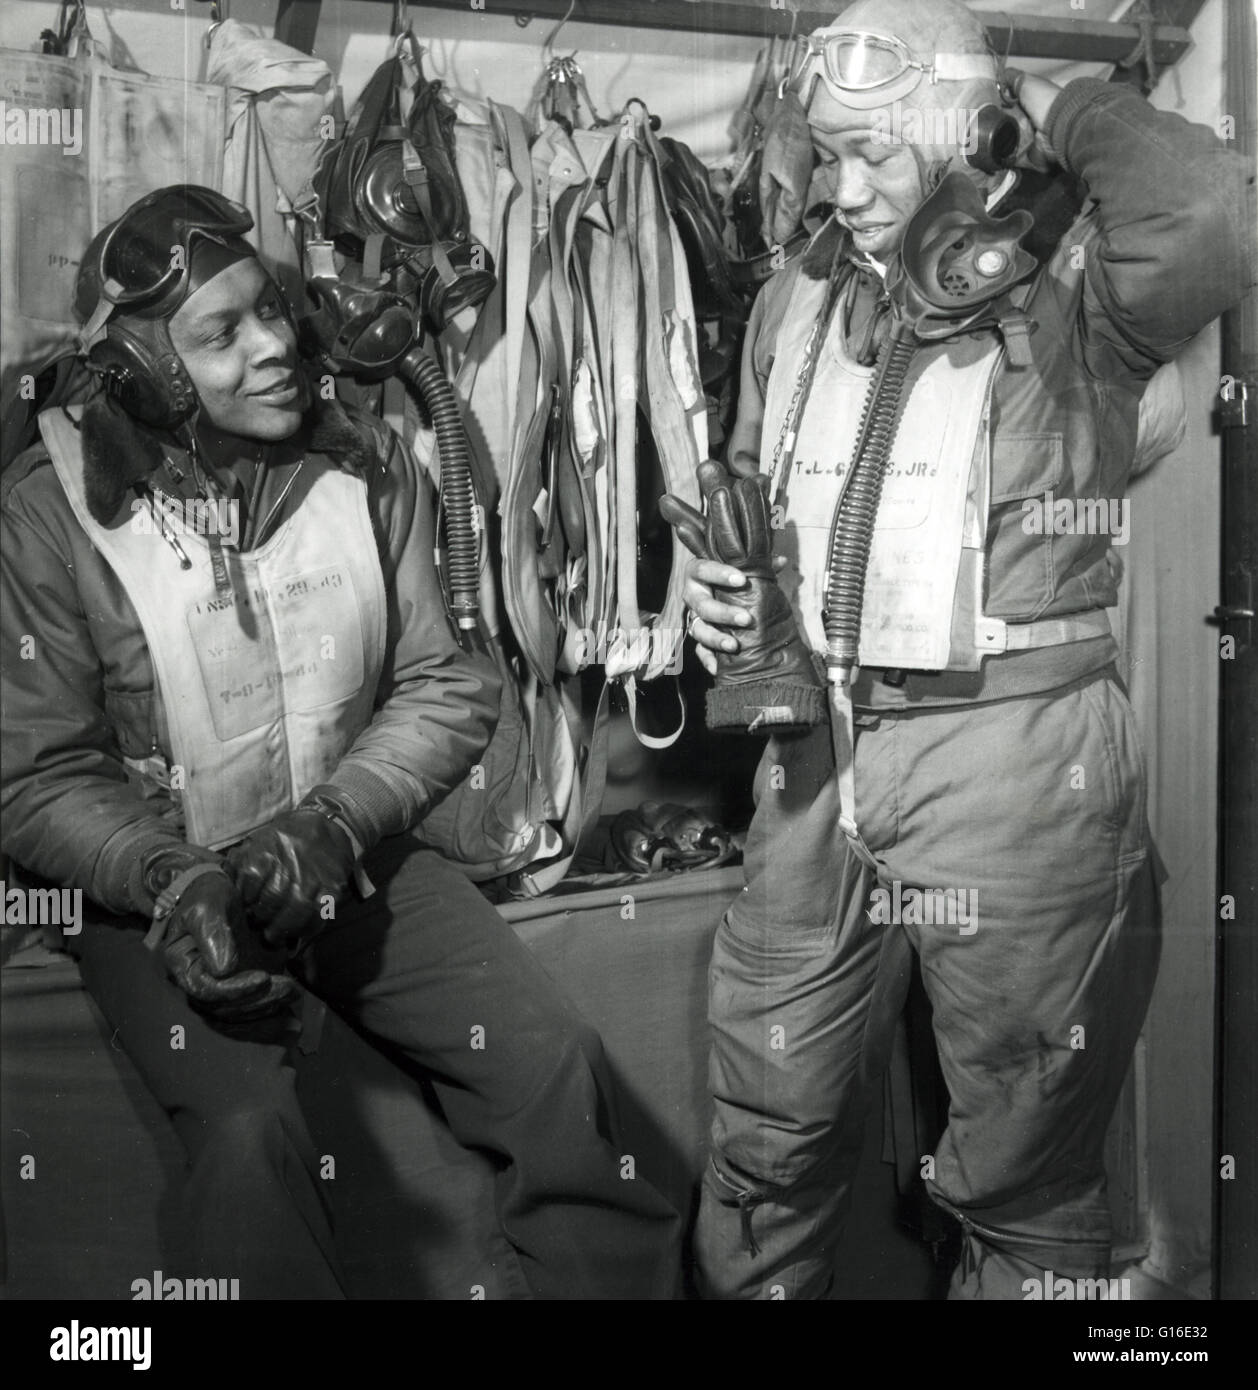 Entitled: 'Members of the 332nd Fighter Group in Ramitelli, Italy' shows left to right, William A. Campbell, Tuskegee, AL, Class 42-F; Thurston L. Gaines, Jr., Freeport, NY, Class 44-G. The Tuskegee Airmen were the first African-American military aviators Stock Photo